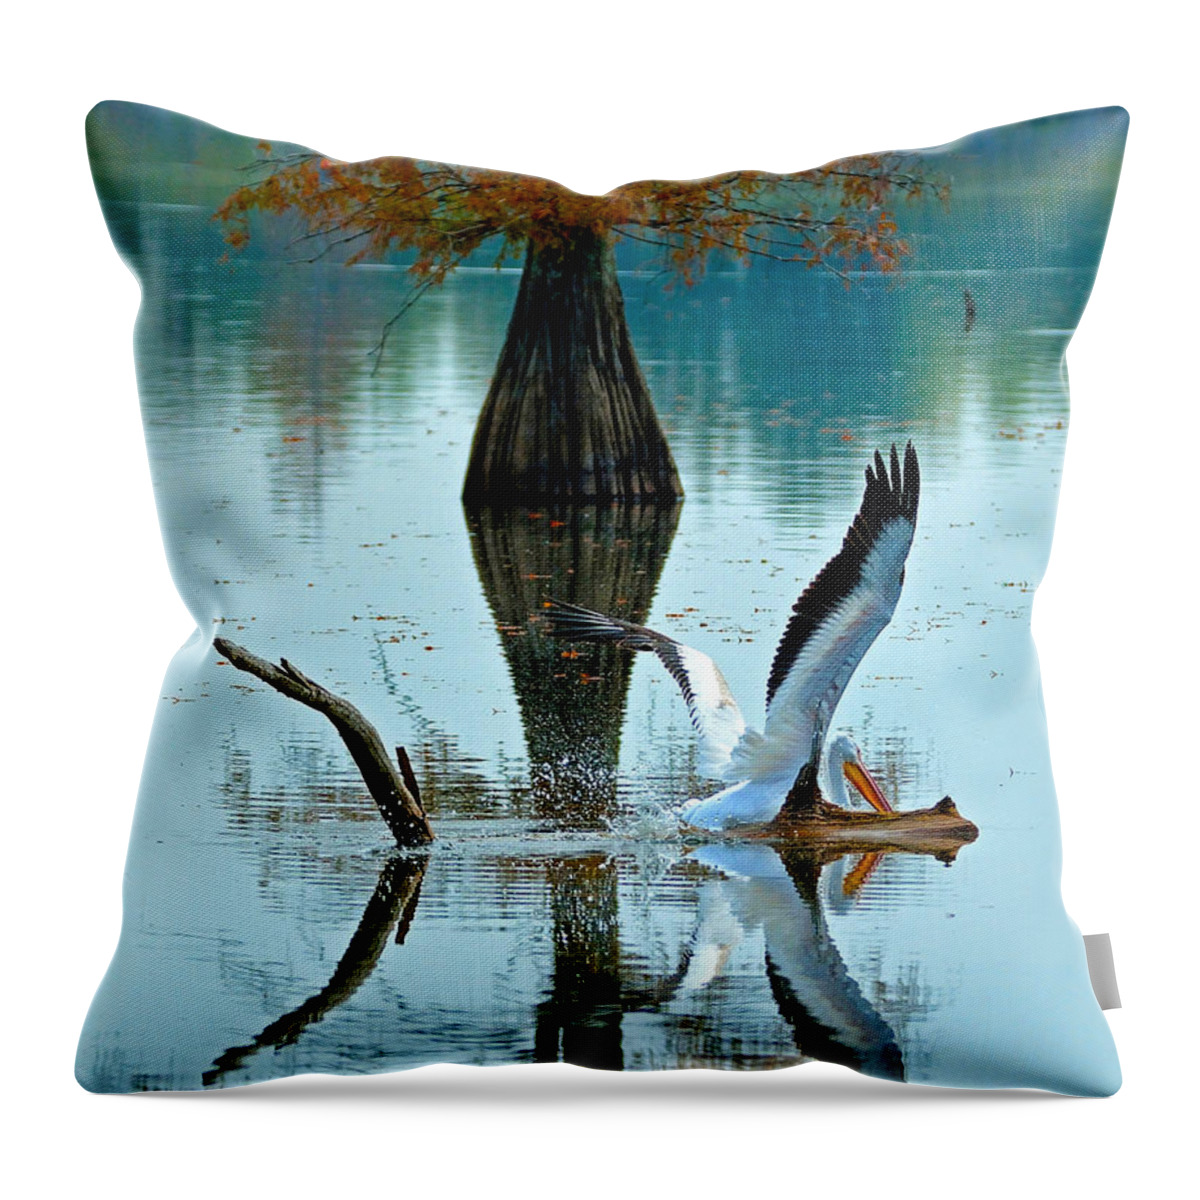  Throw Pillow featuring the photograph White Pelican by Kevin Pugh